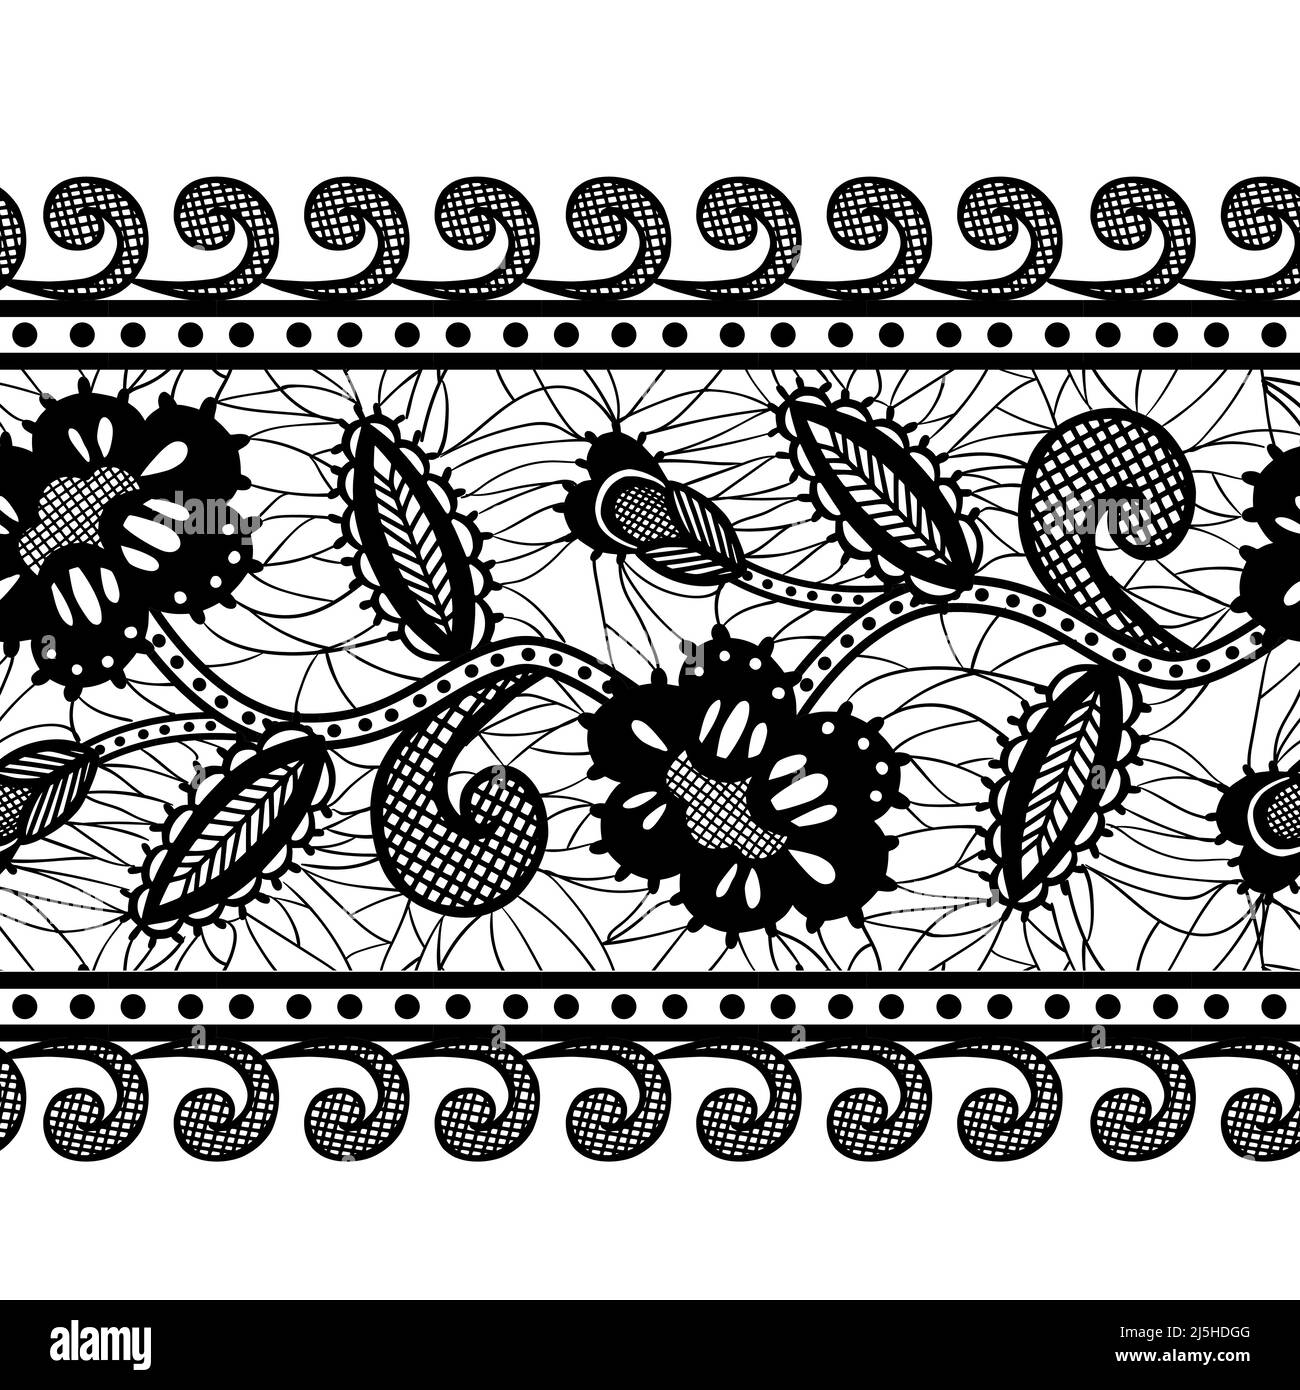 Floral lace pattern Royalty Free Vector Image - VectorStock